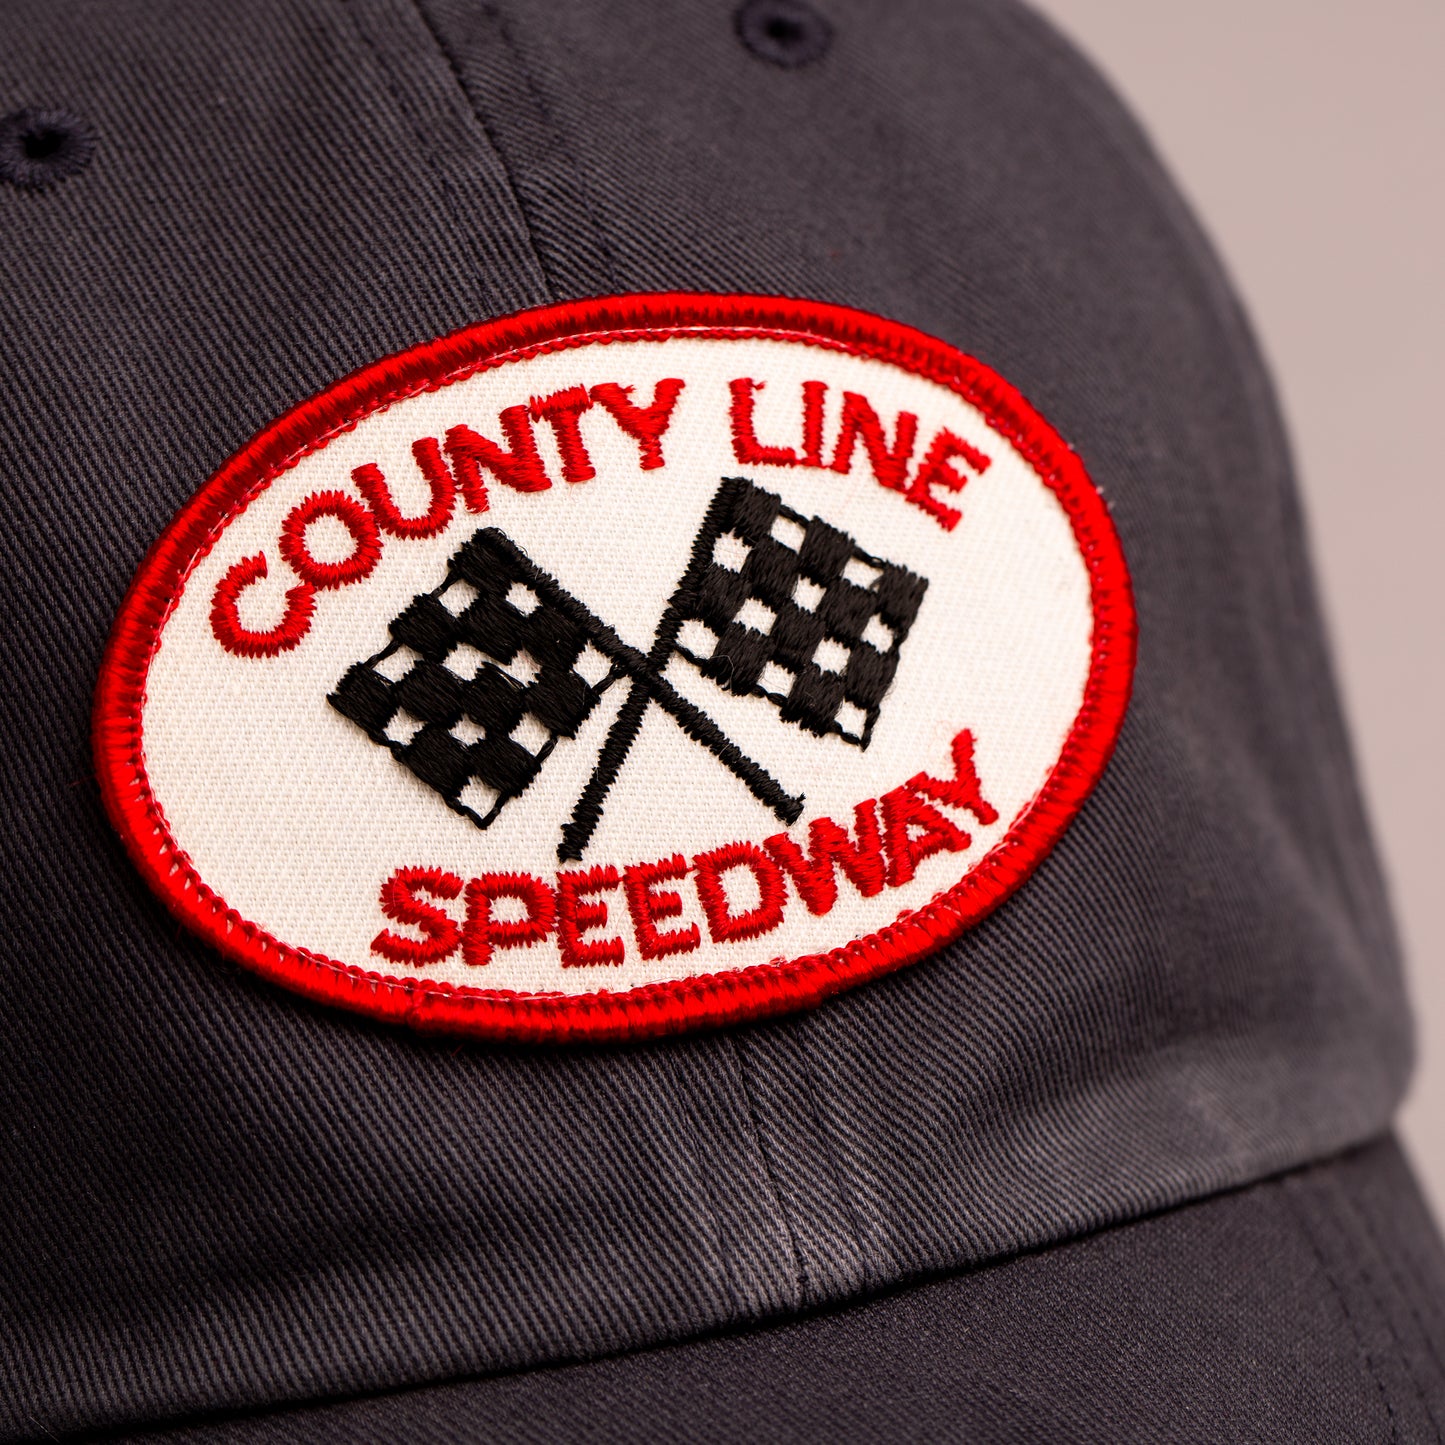 County Line Speedway